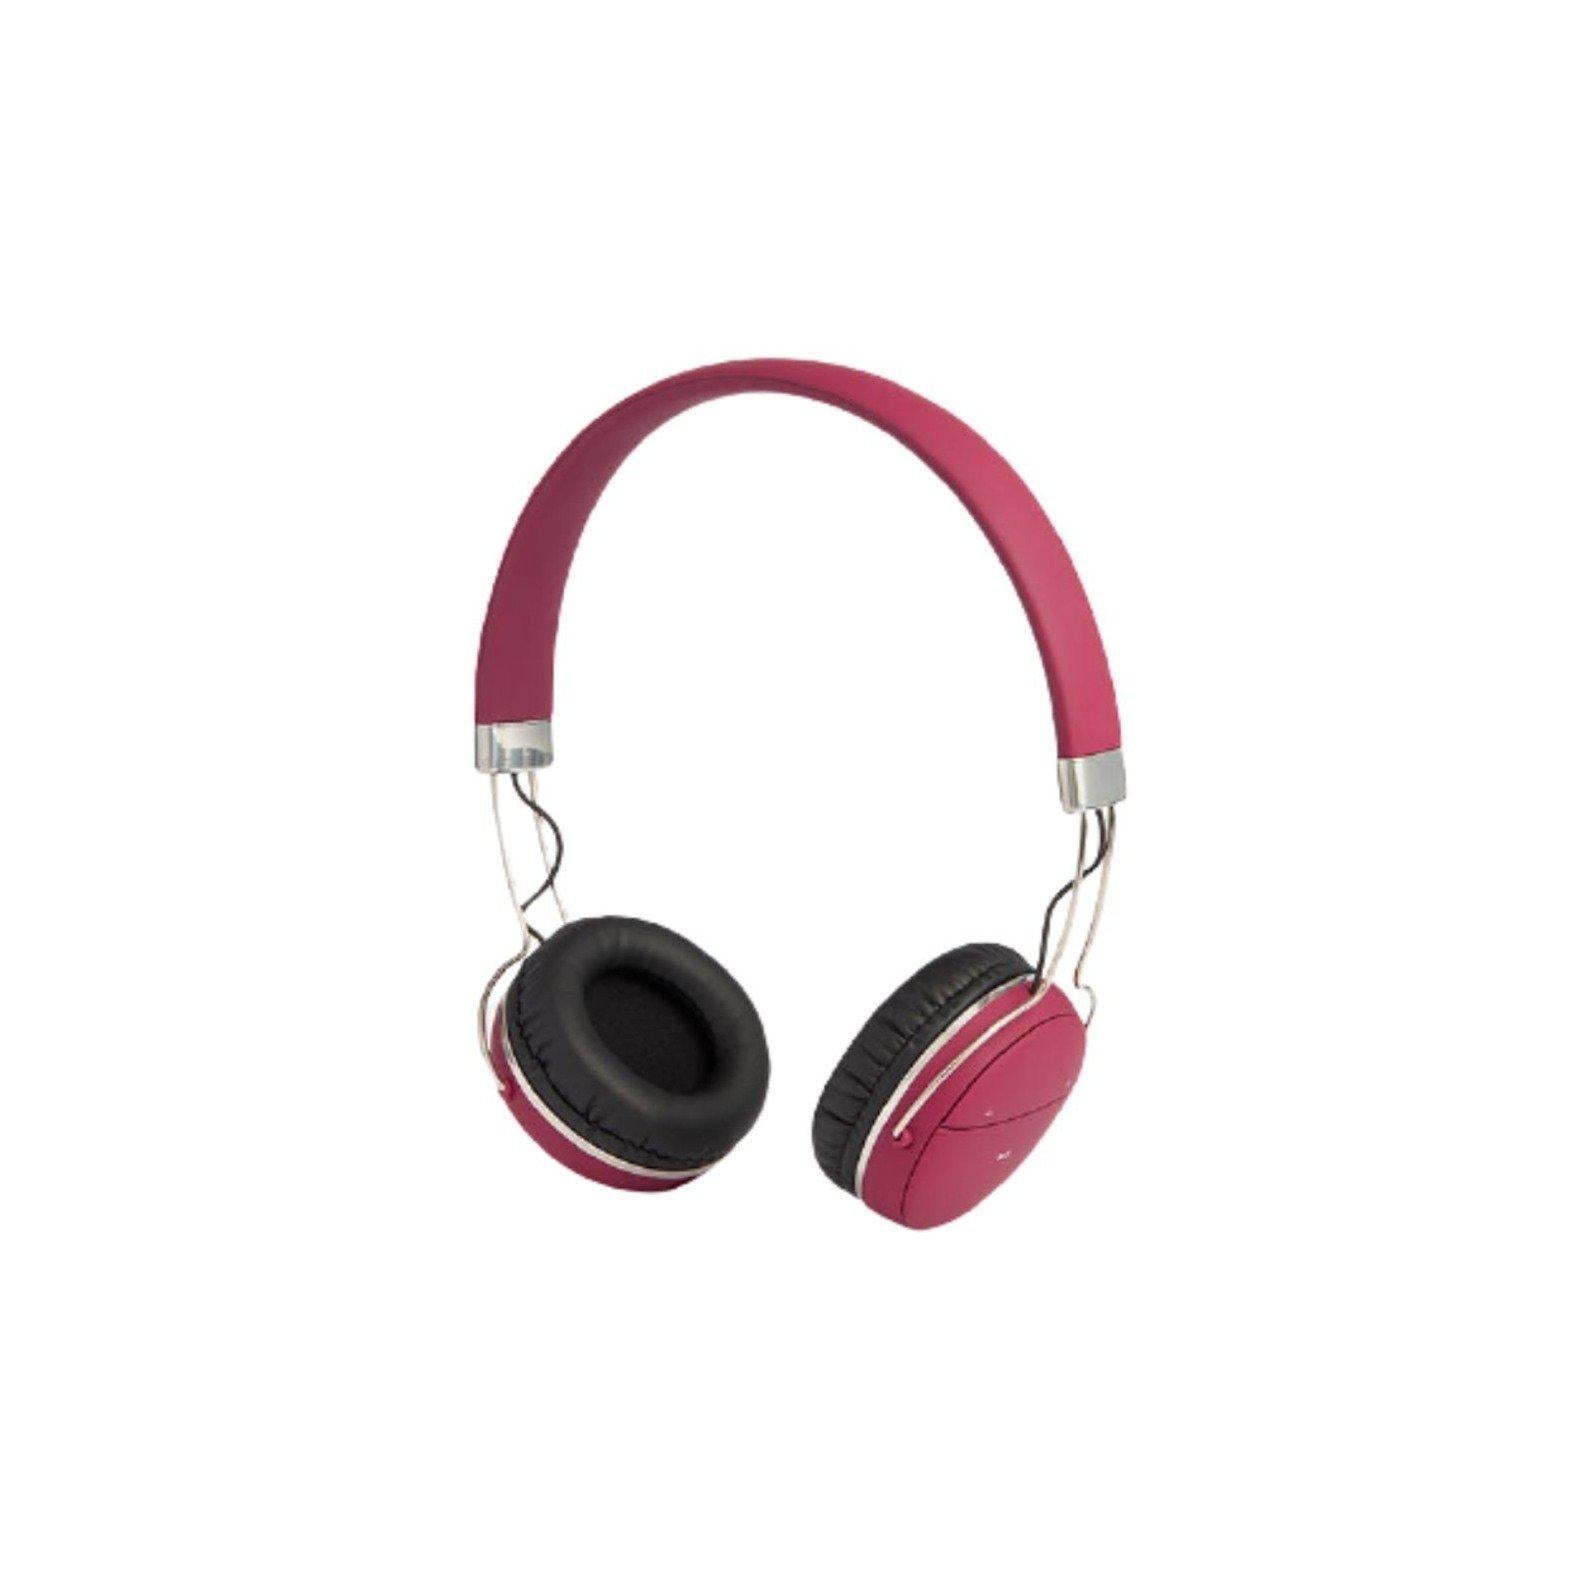 John Lewis & Partners H2 Wireless On-Ear Headphones with Mic/Remote